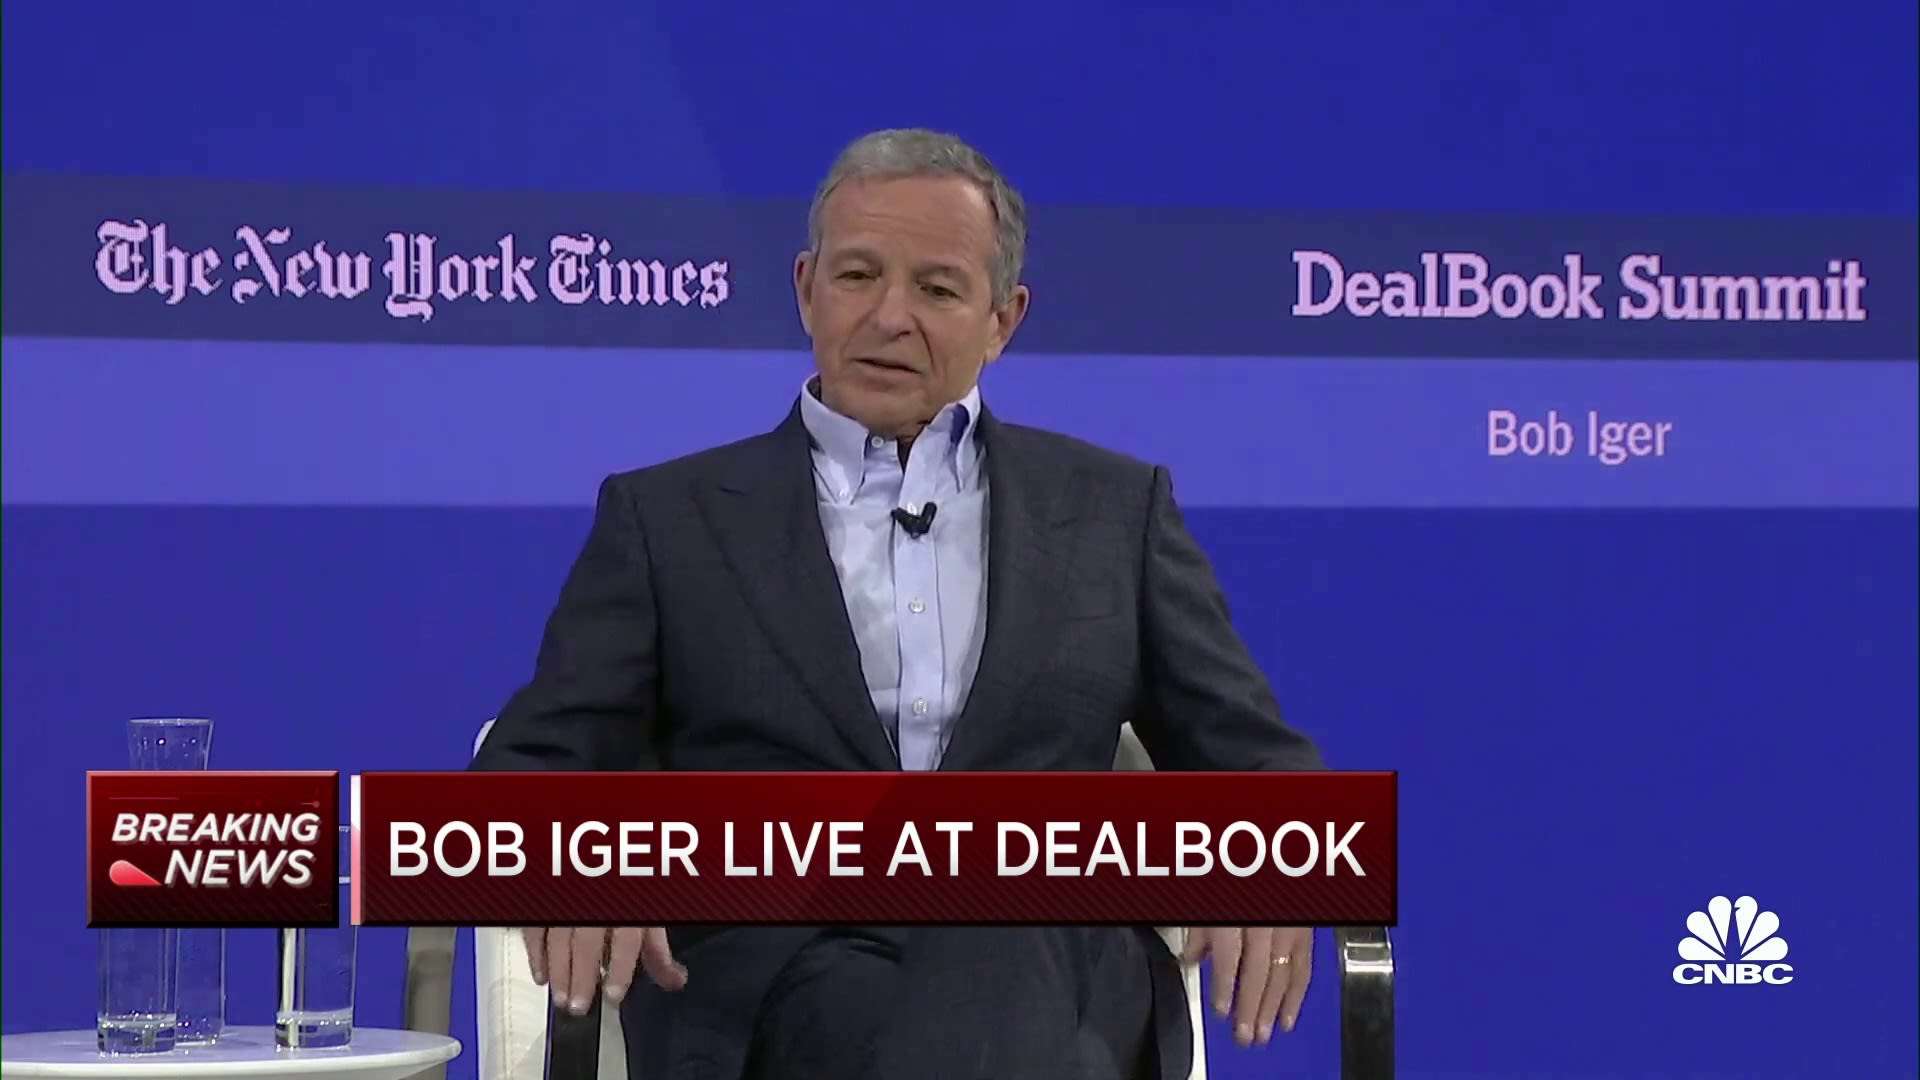 Bob Iger: I was not seeking to return to Disney at all